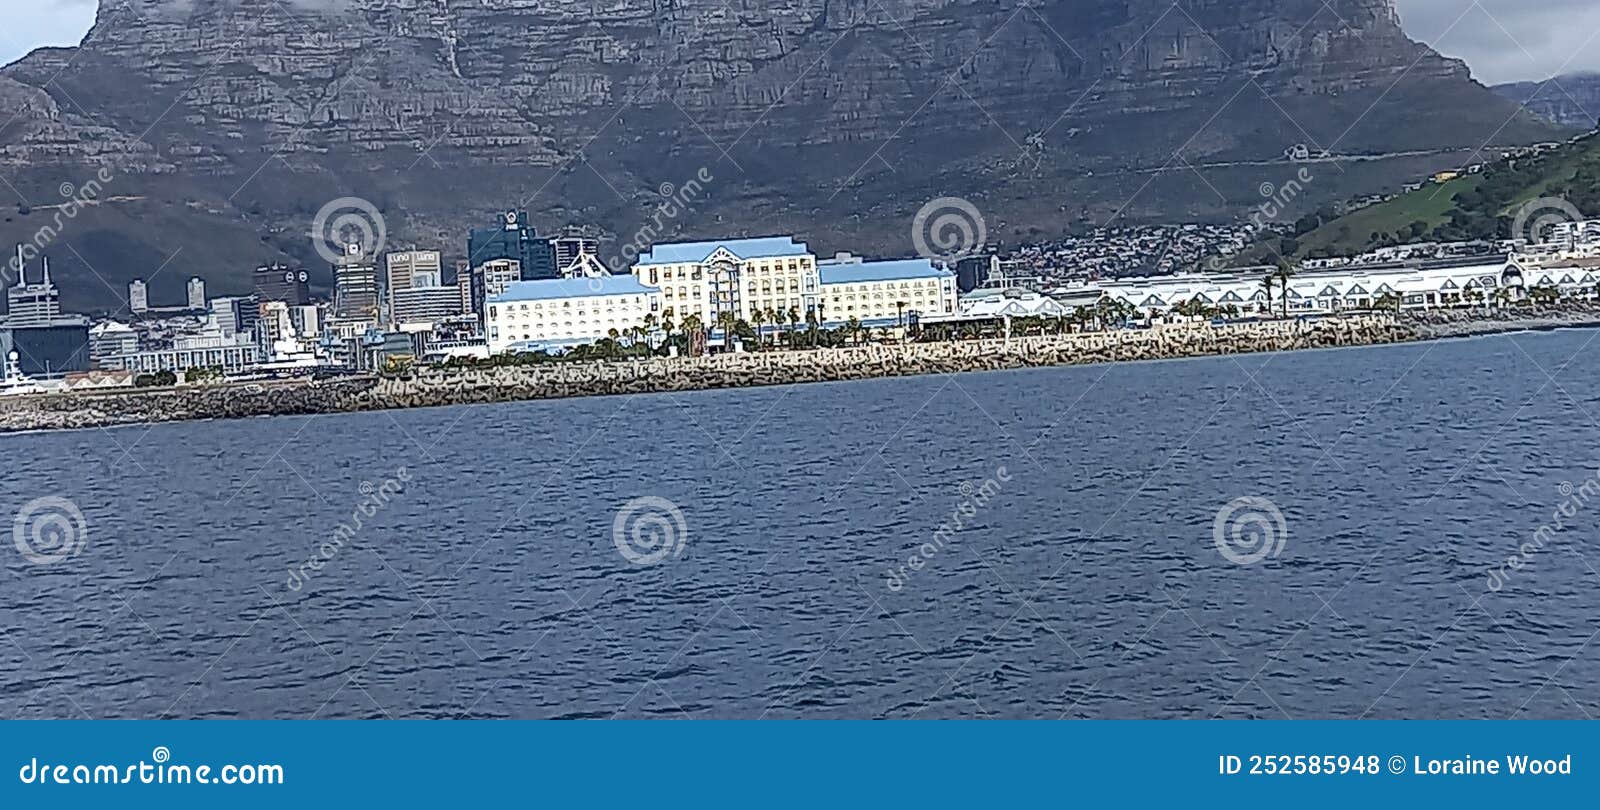 table bay hotel cape town